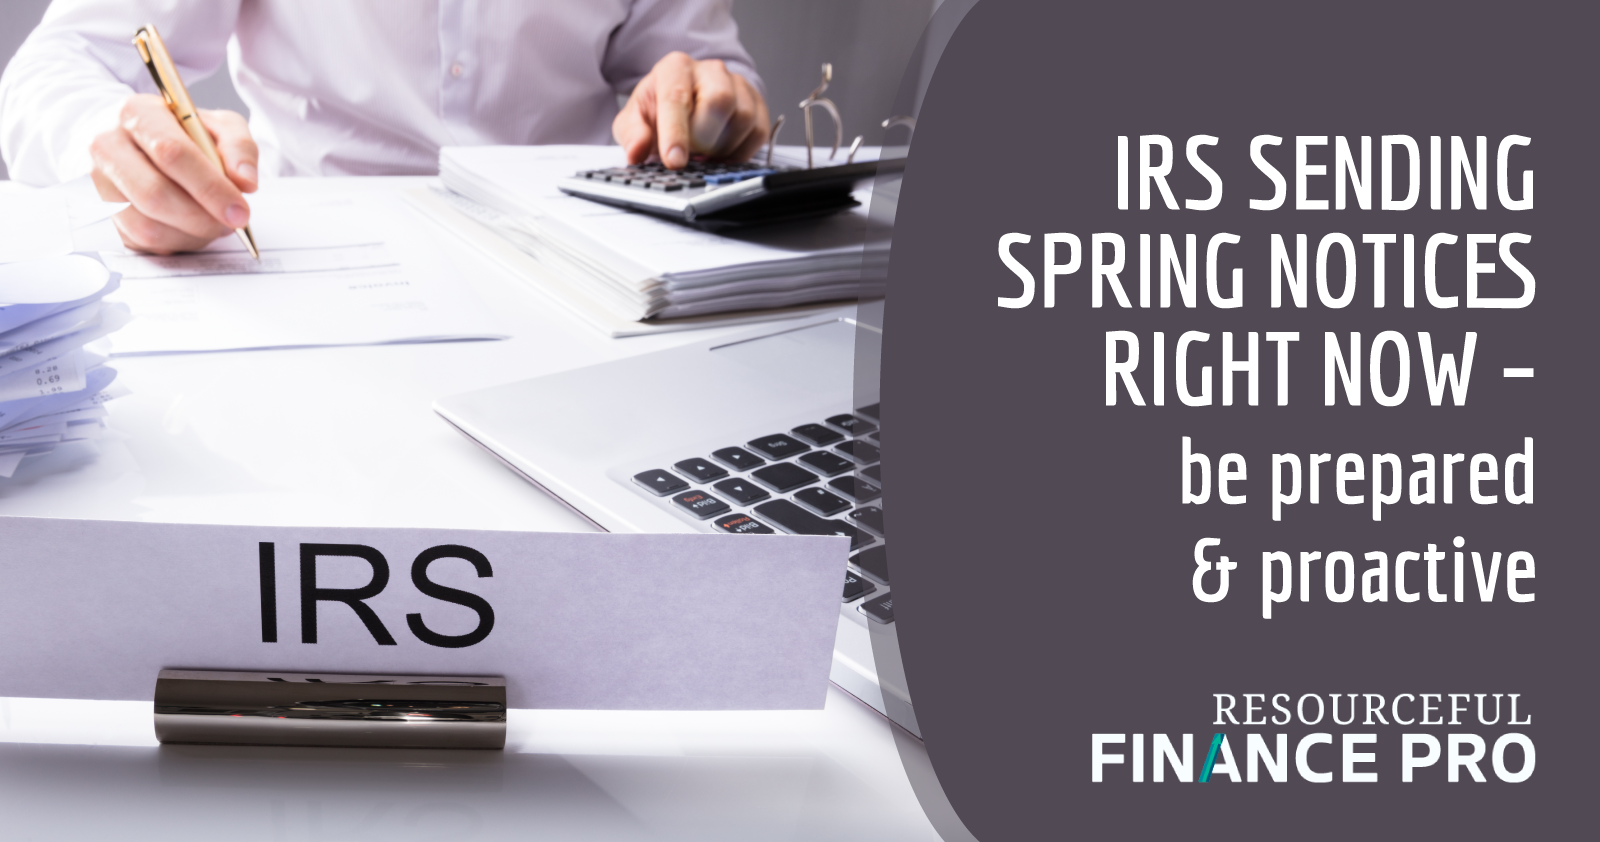 irs sending spring notices right now be prepared and proactive